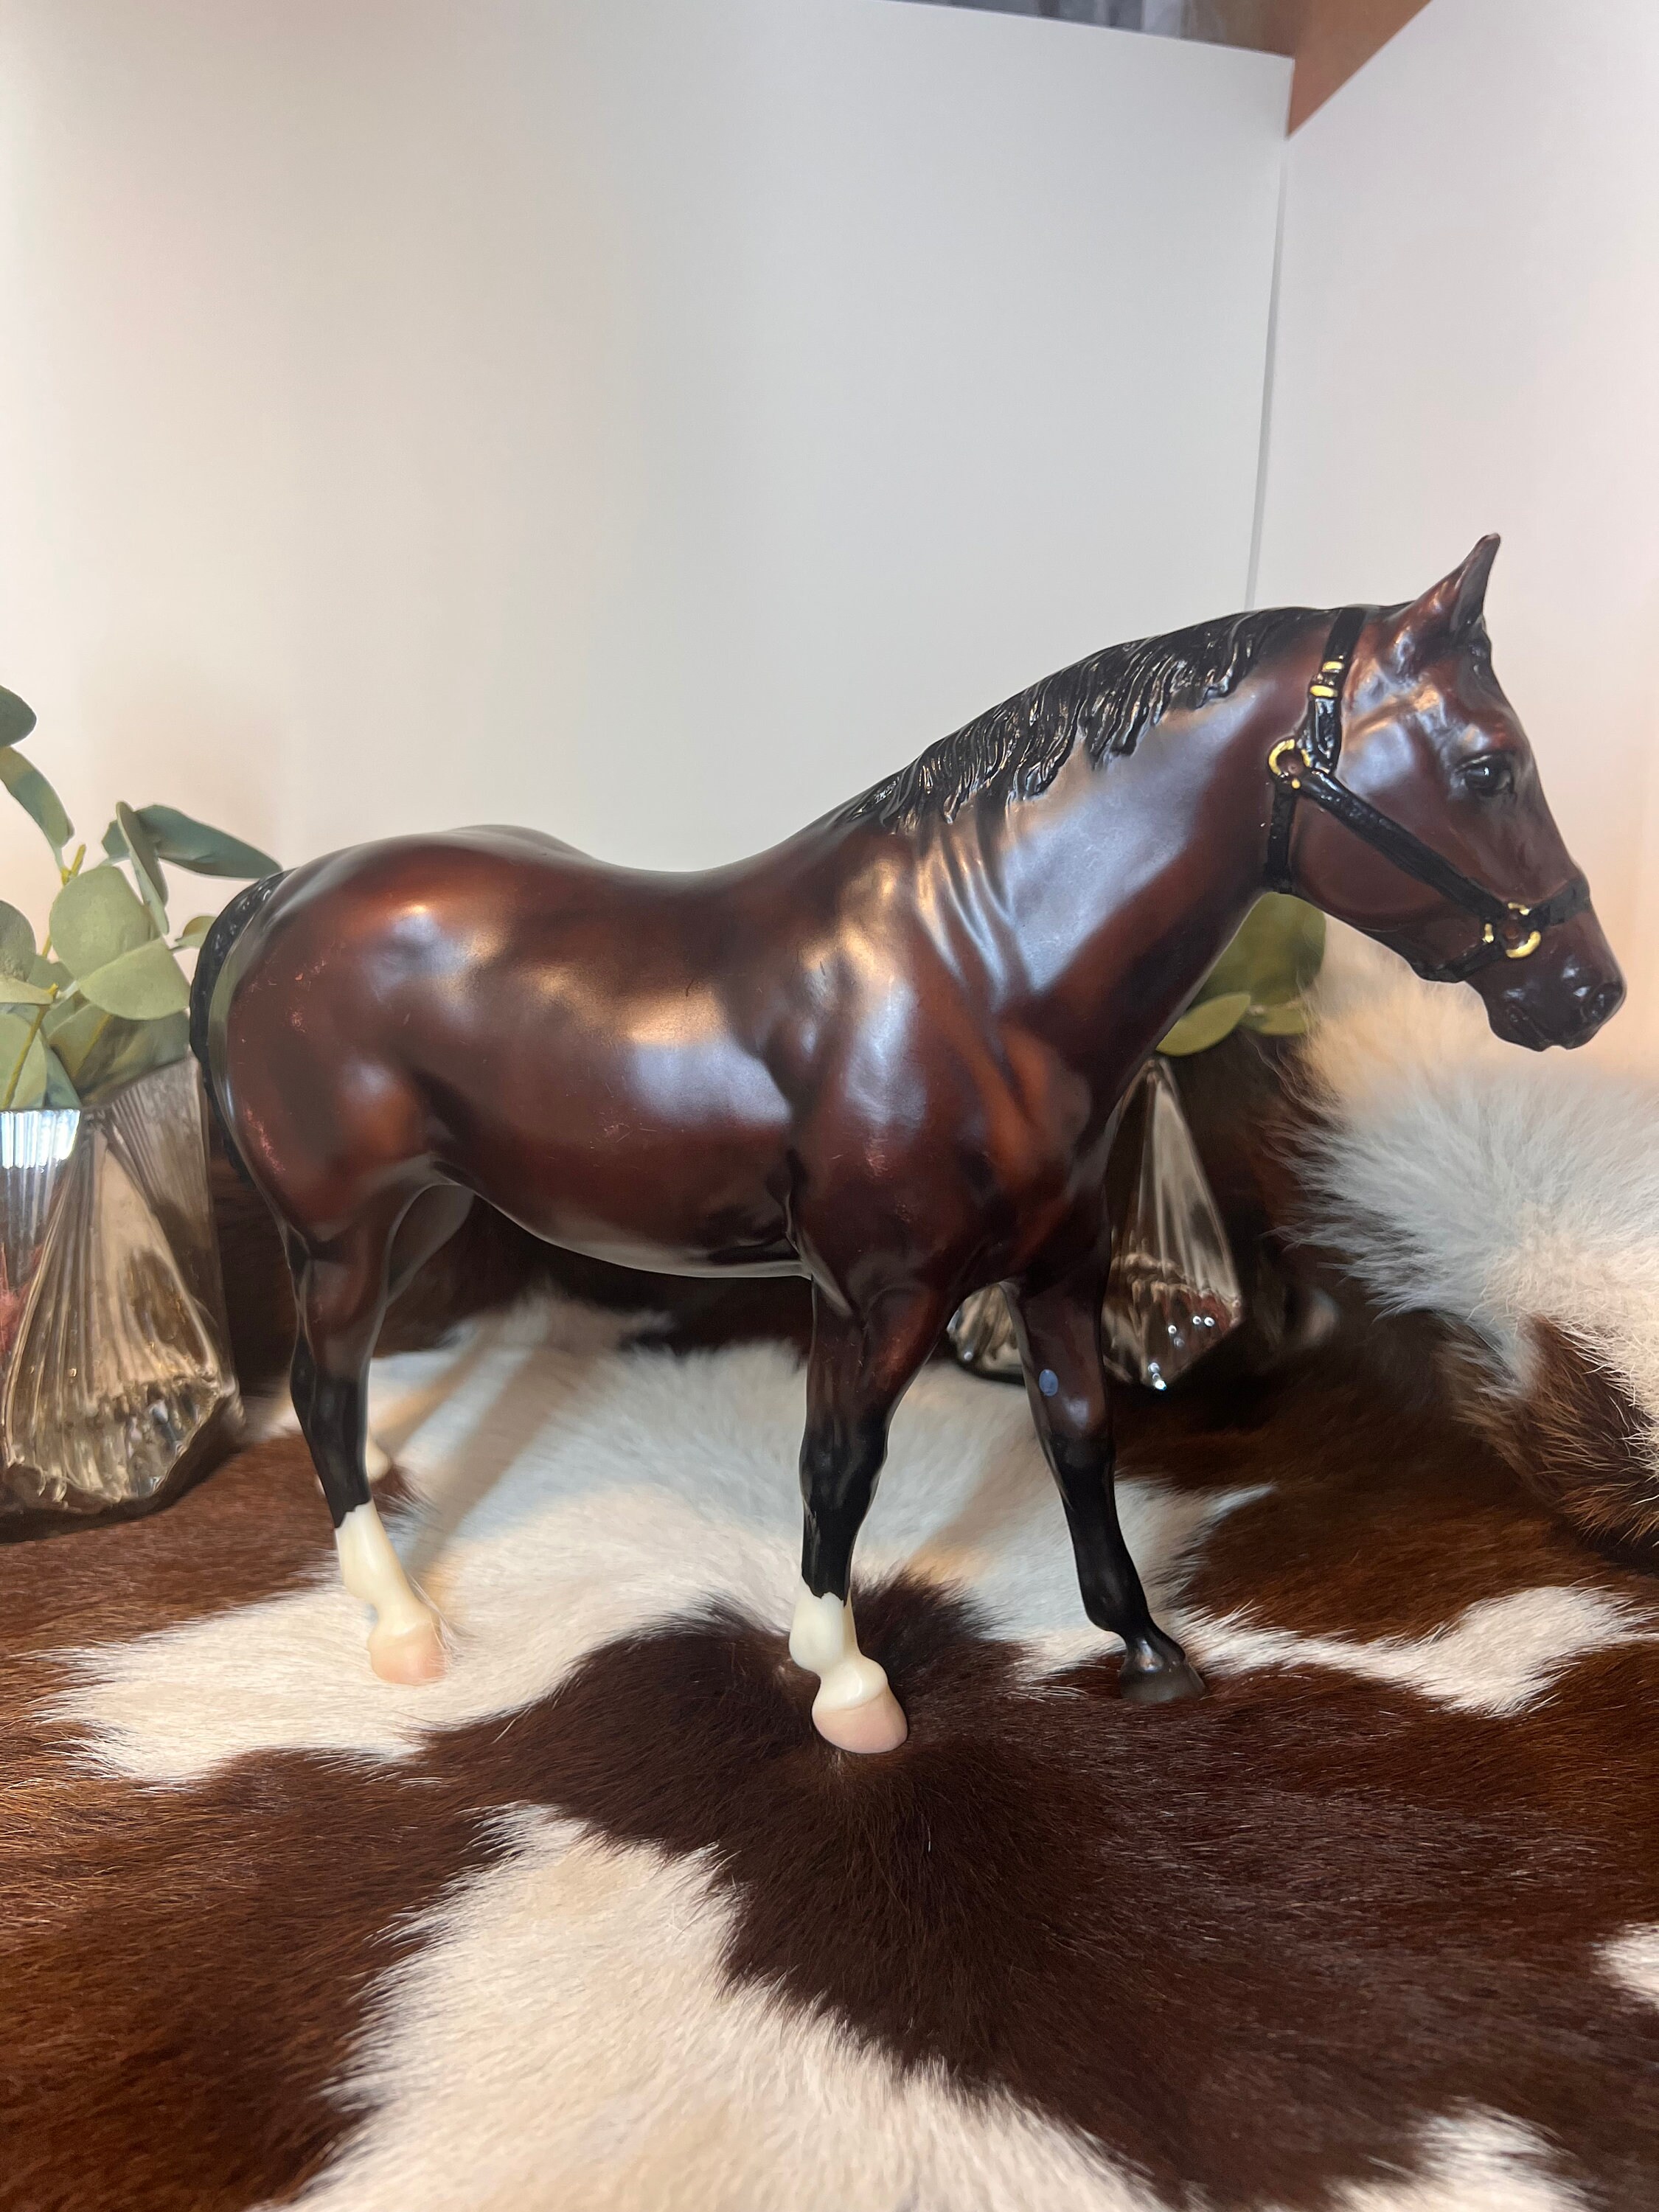 Breyer Traditional 1:9 Scale Model Horse Tack Martingale